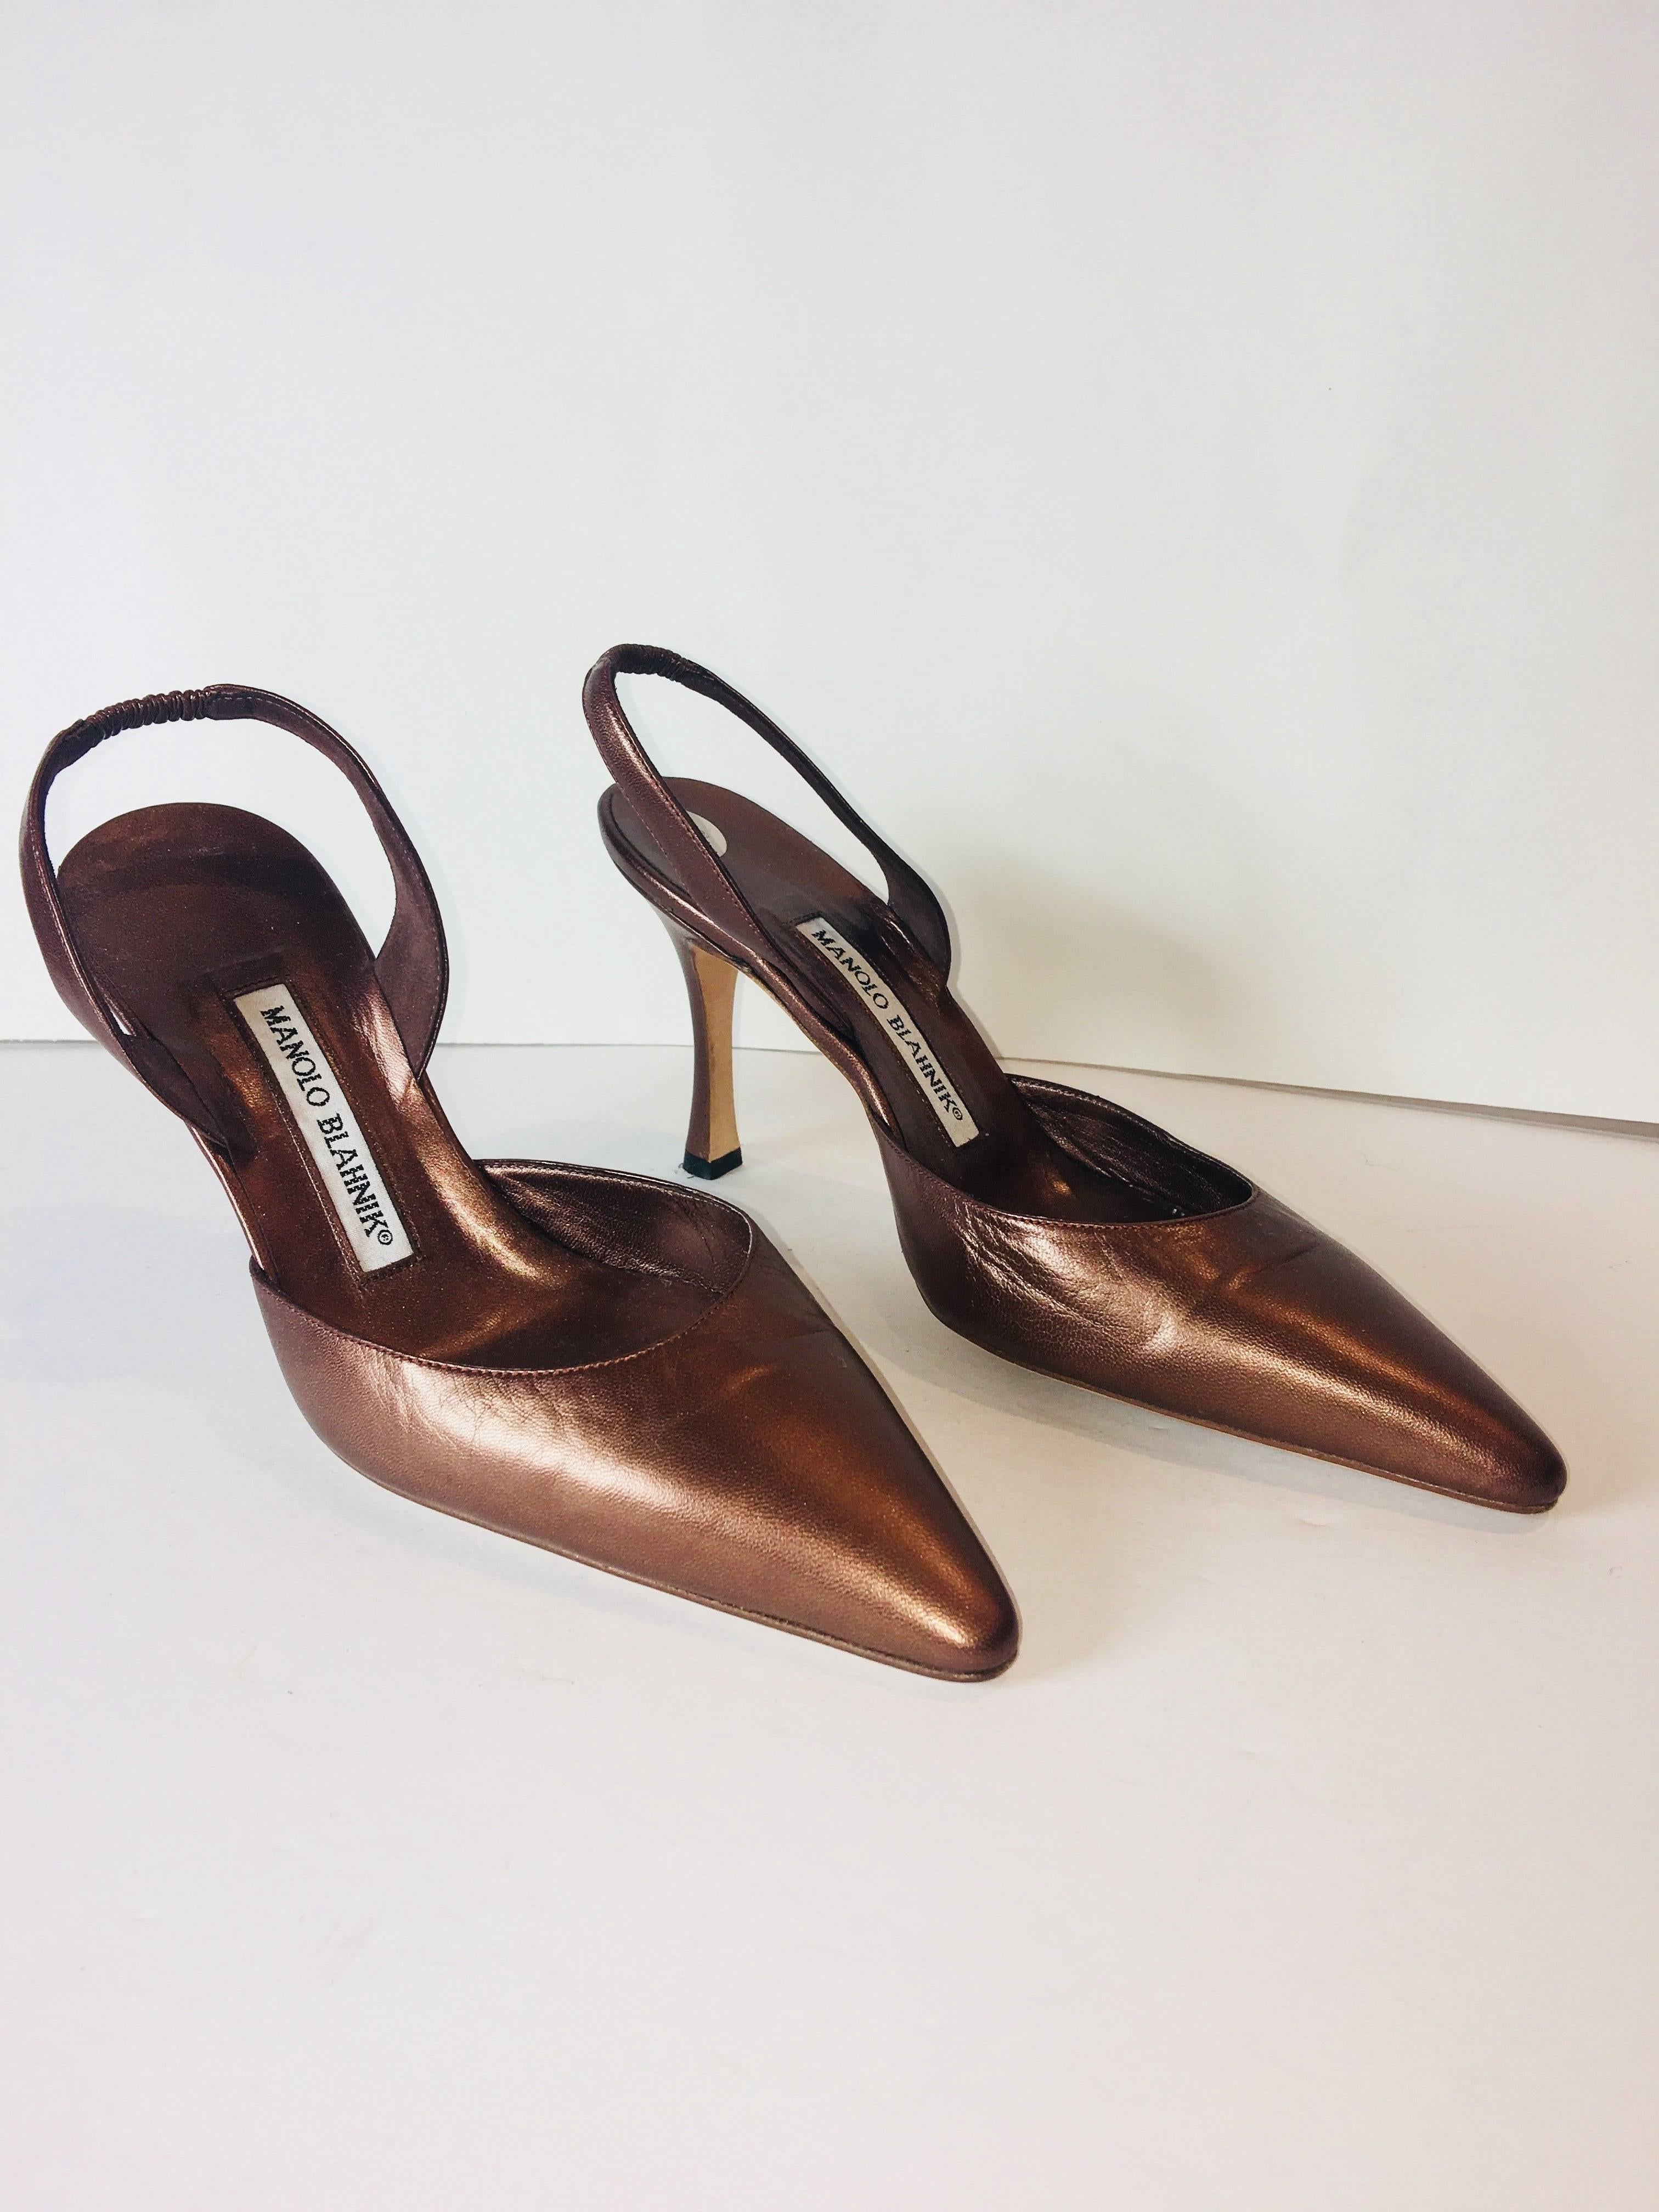 Manolo Blahnik Slingback in Bronze Leather with Pointed Toe..